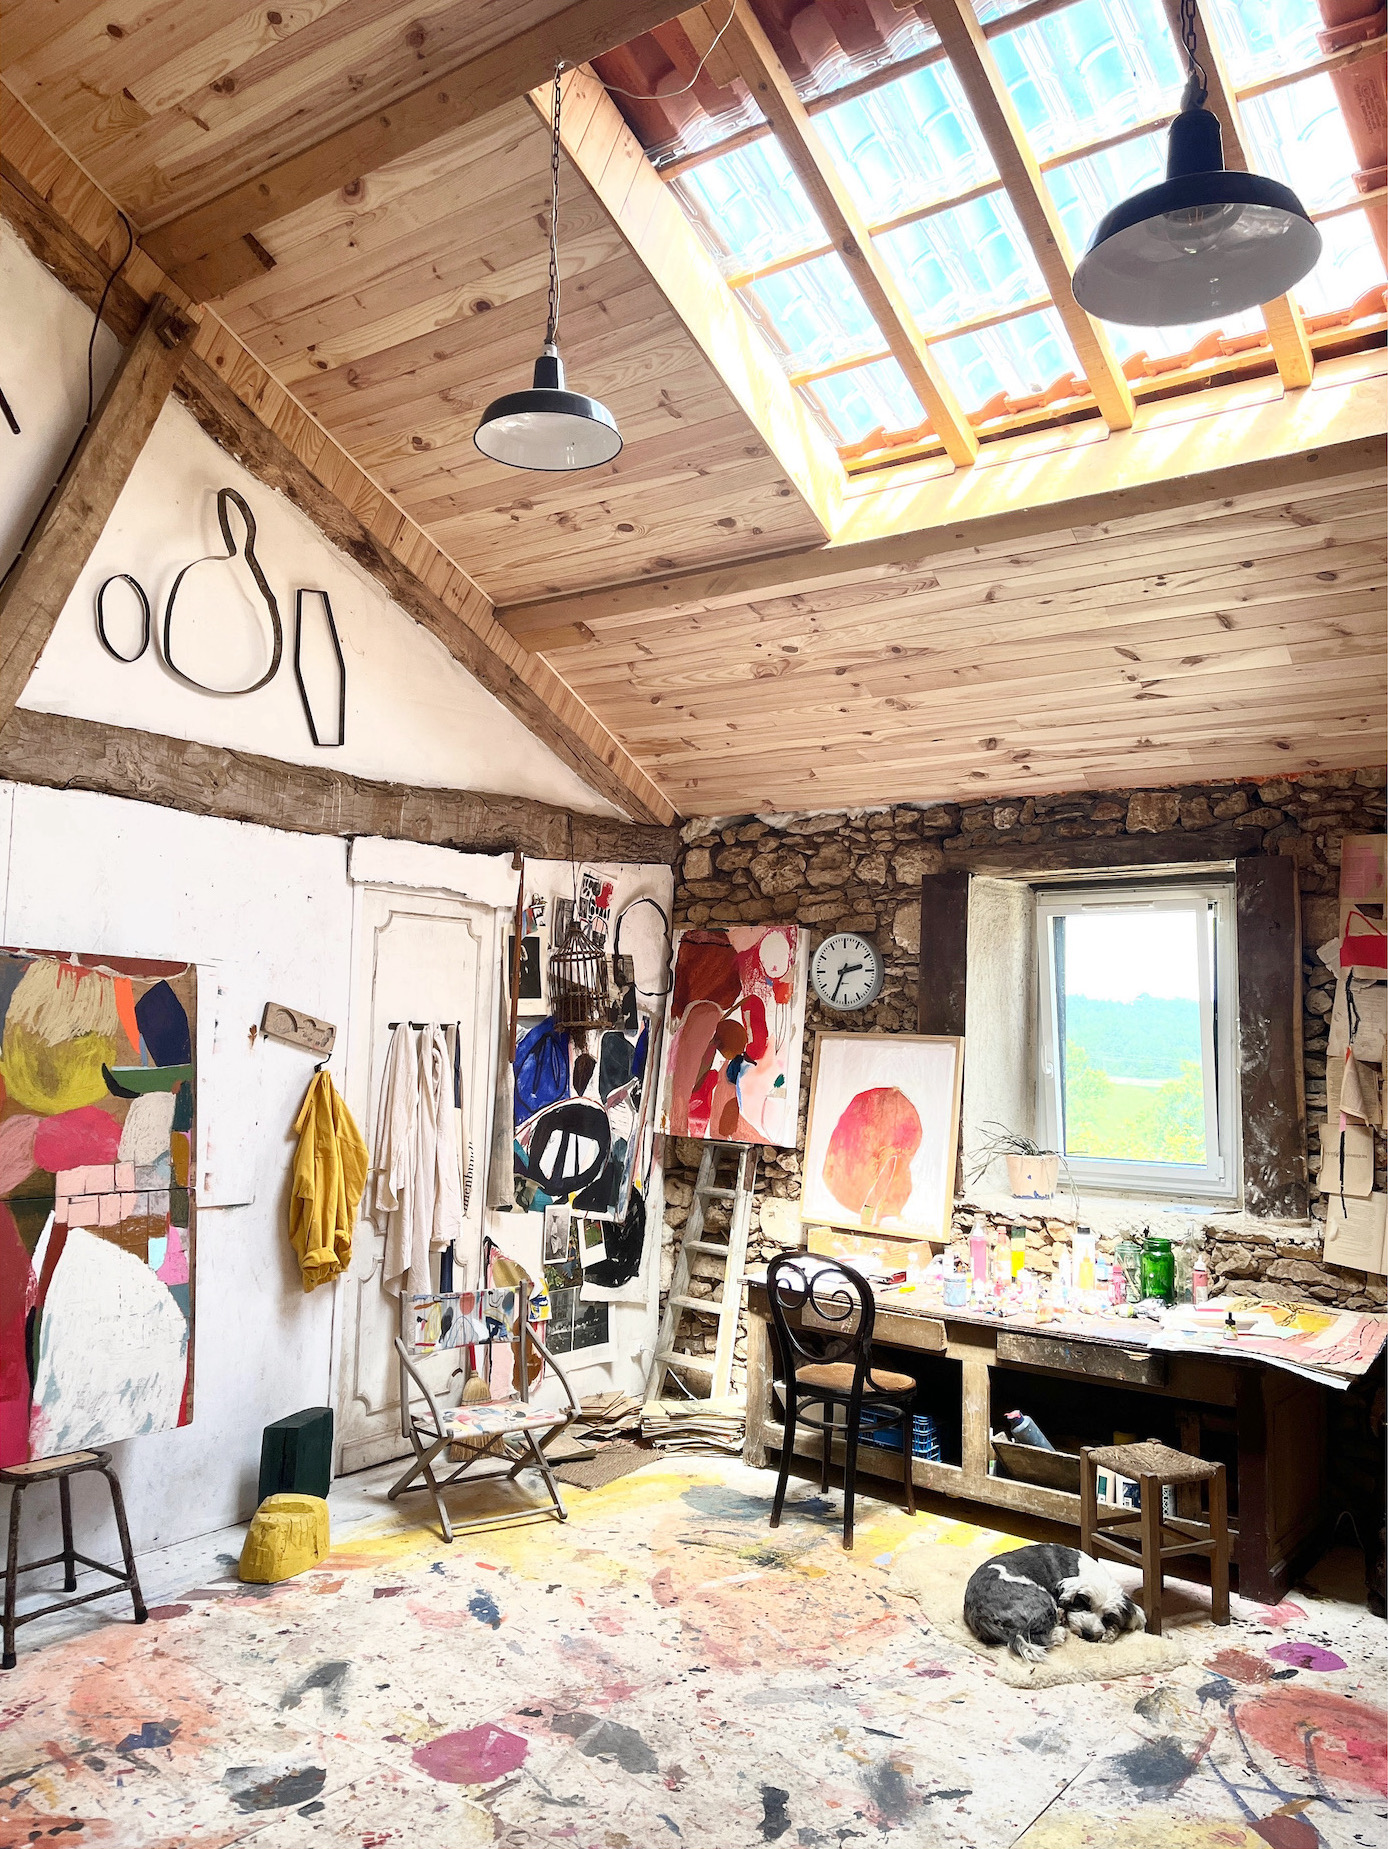 heather built a second floor in the barn to use as her painting studio. lottie, 22